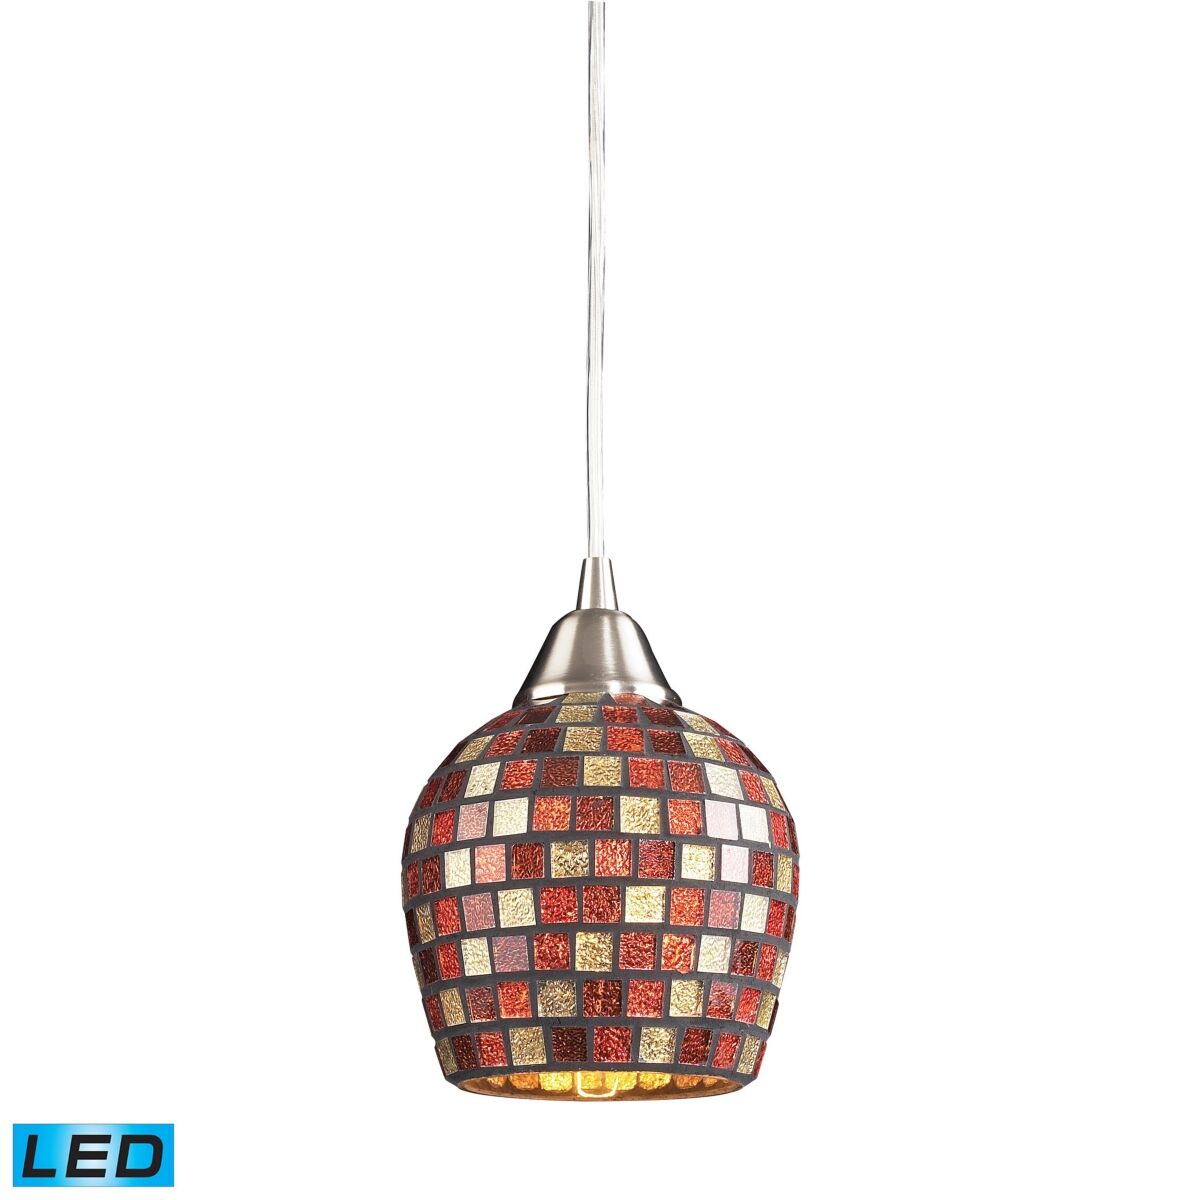 Macy's 1 Light Pendant in Satin Nickel and Multi Mosaic Glass - Led Offering Up To 800 Lumens (60 Watt Equivalent) - Silver